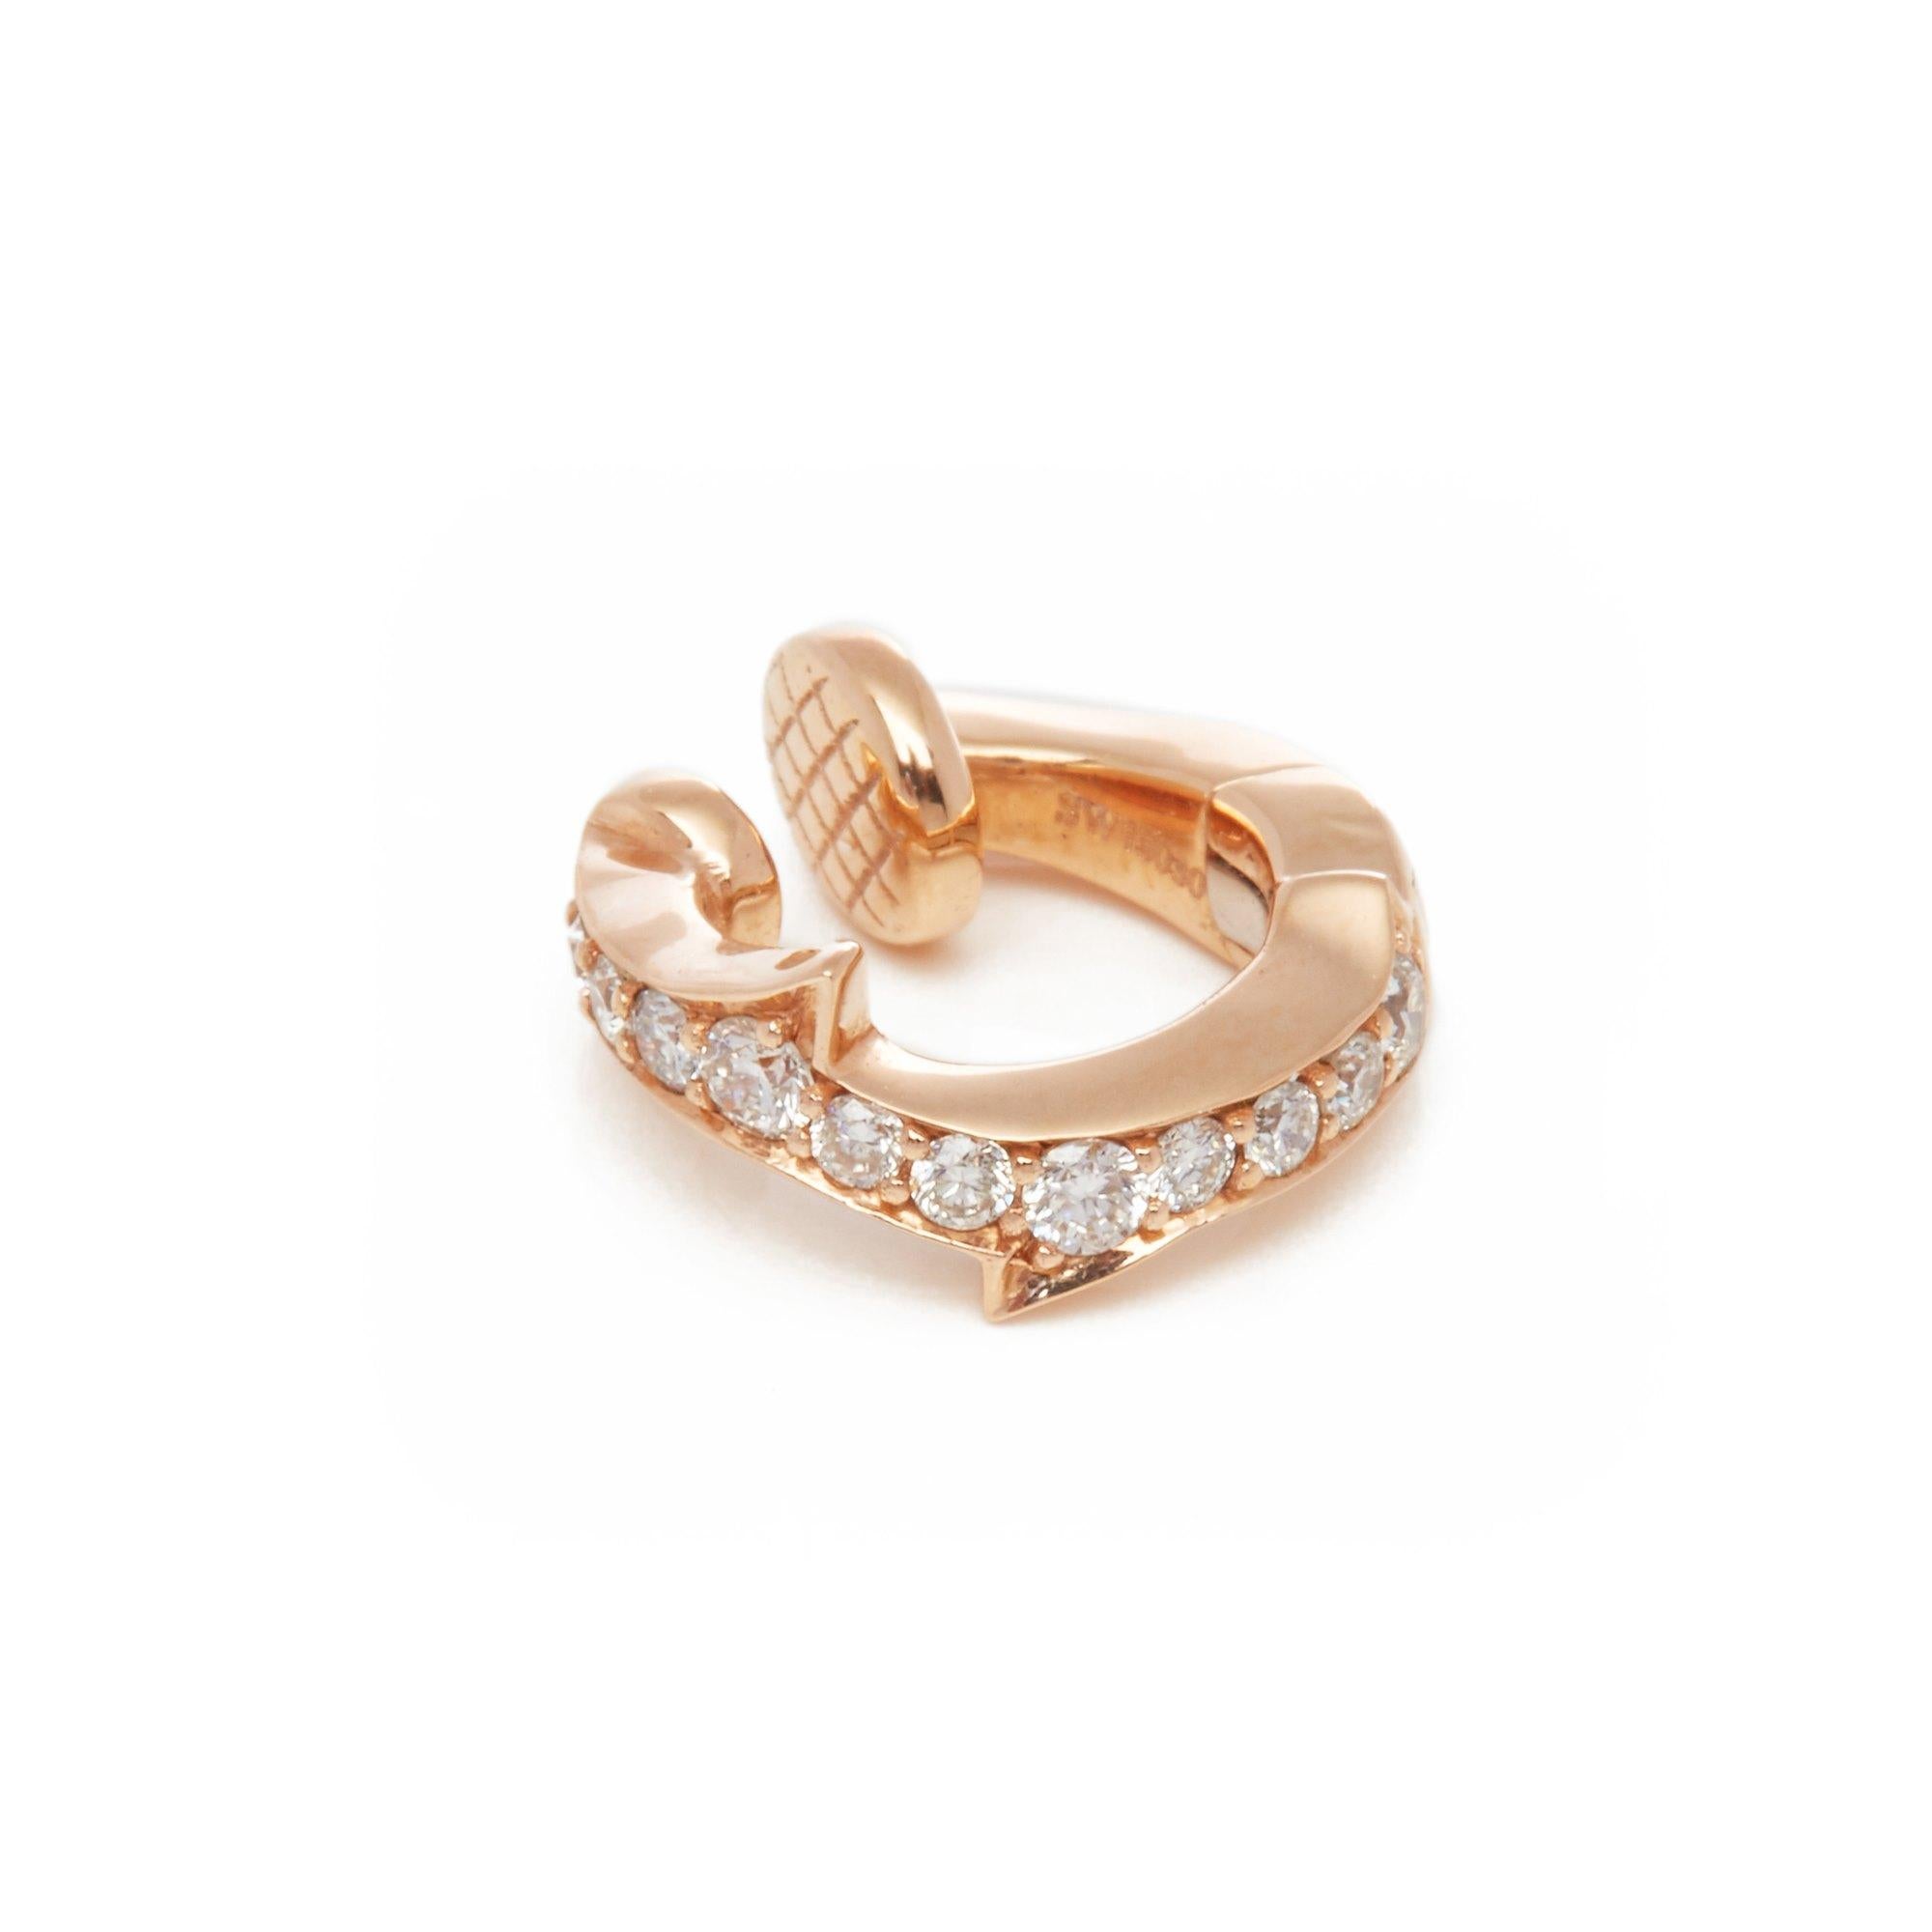 This Earclip by Stephen Webster is from his Thorn Collection and features Twelve Round Brilliant Diamonds Totalling 0.12cts. Set in 18k Rose Gold. Complete with Xupes Presentation Box. Our Xupes reference is COMJ441 should you need to quote this.